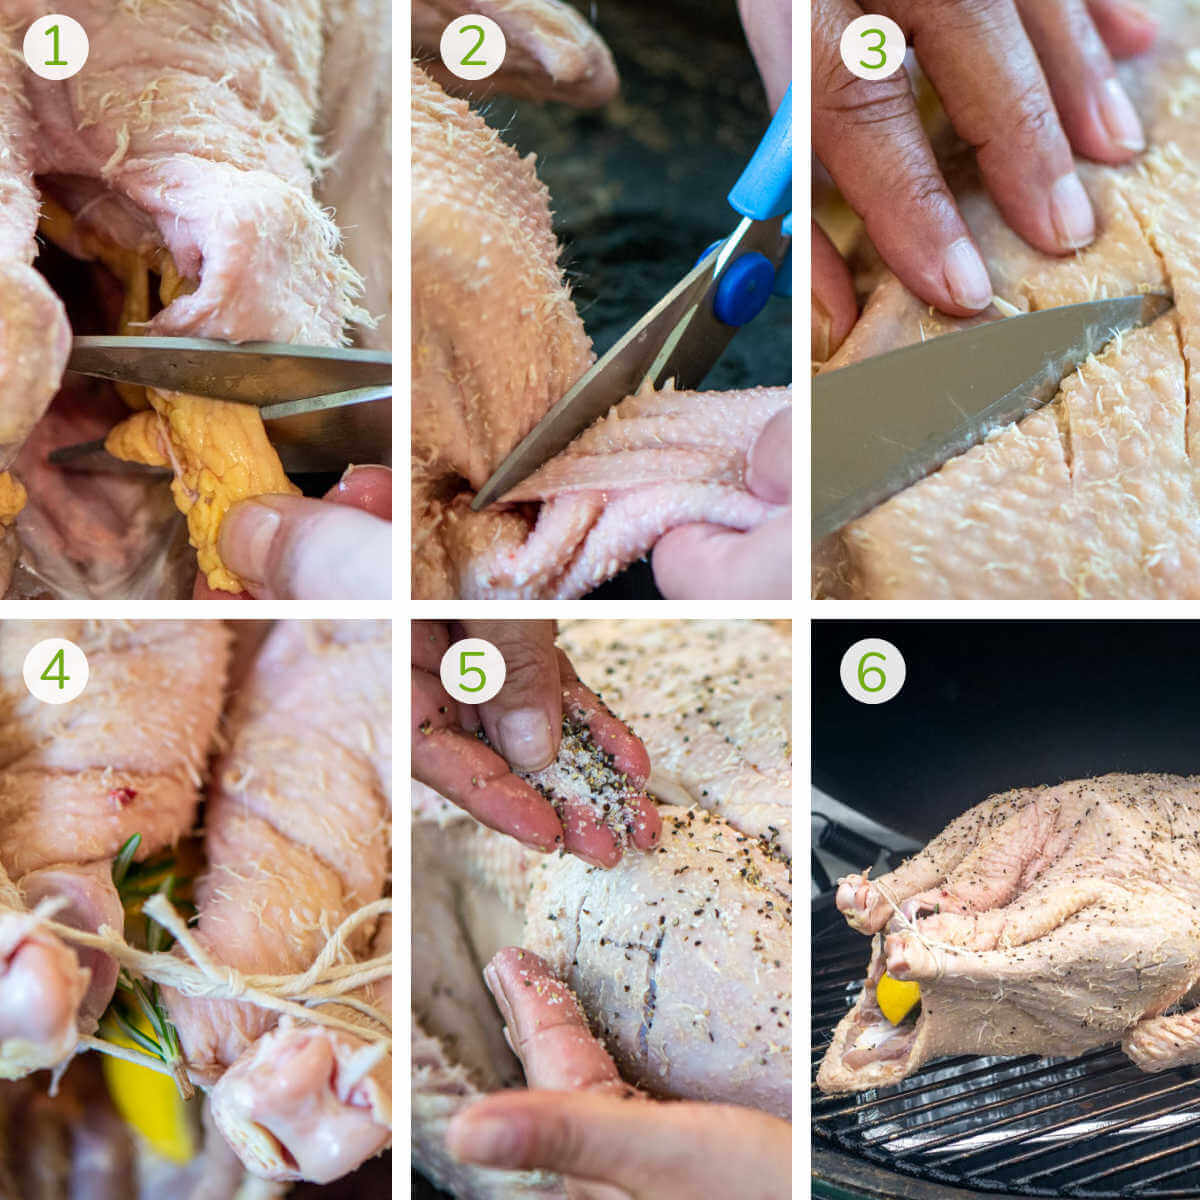 six steps showing how to cut the excess fat and skin off of a goose, score the skin, season and grill it.